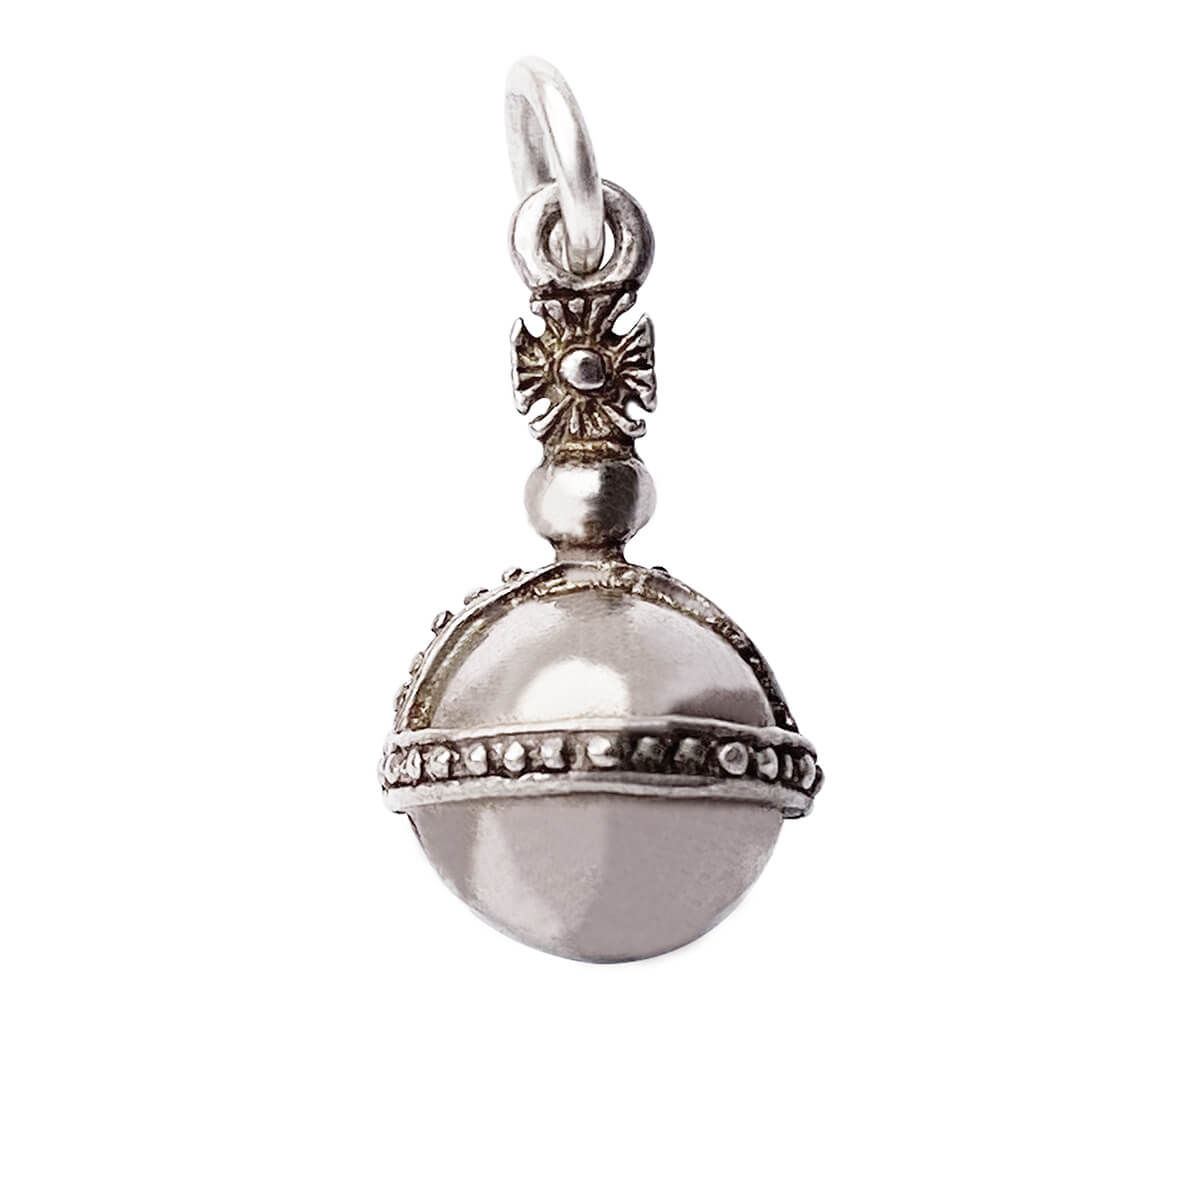 Vintage silver orb and cross charm royal pendant from Charmarama